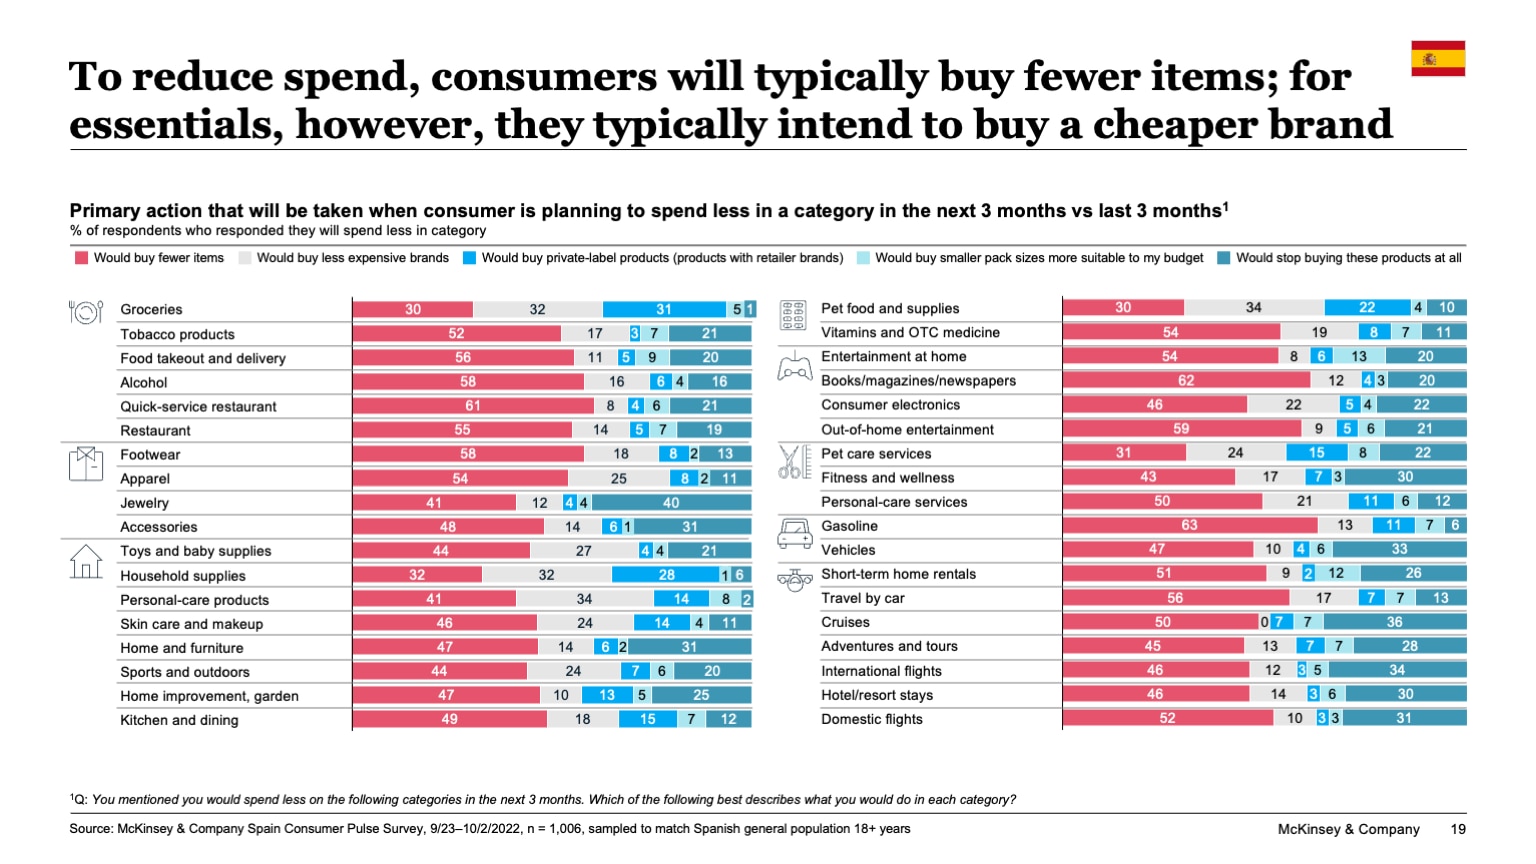 To reduce spend, consumers will typically buy fewer items; for essentials, however, they typically intend to buy a cheaper brand